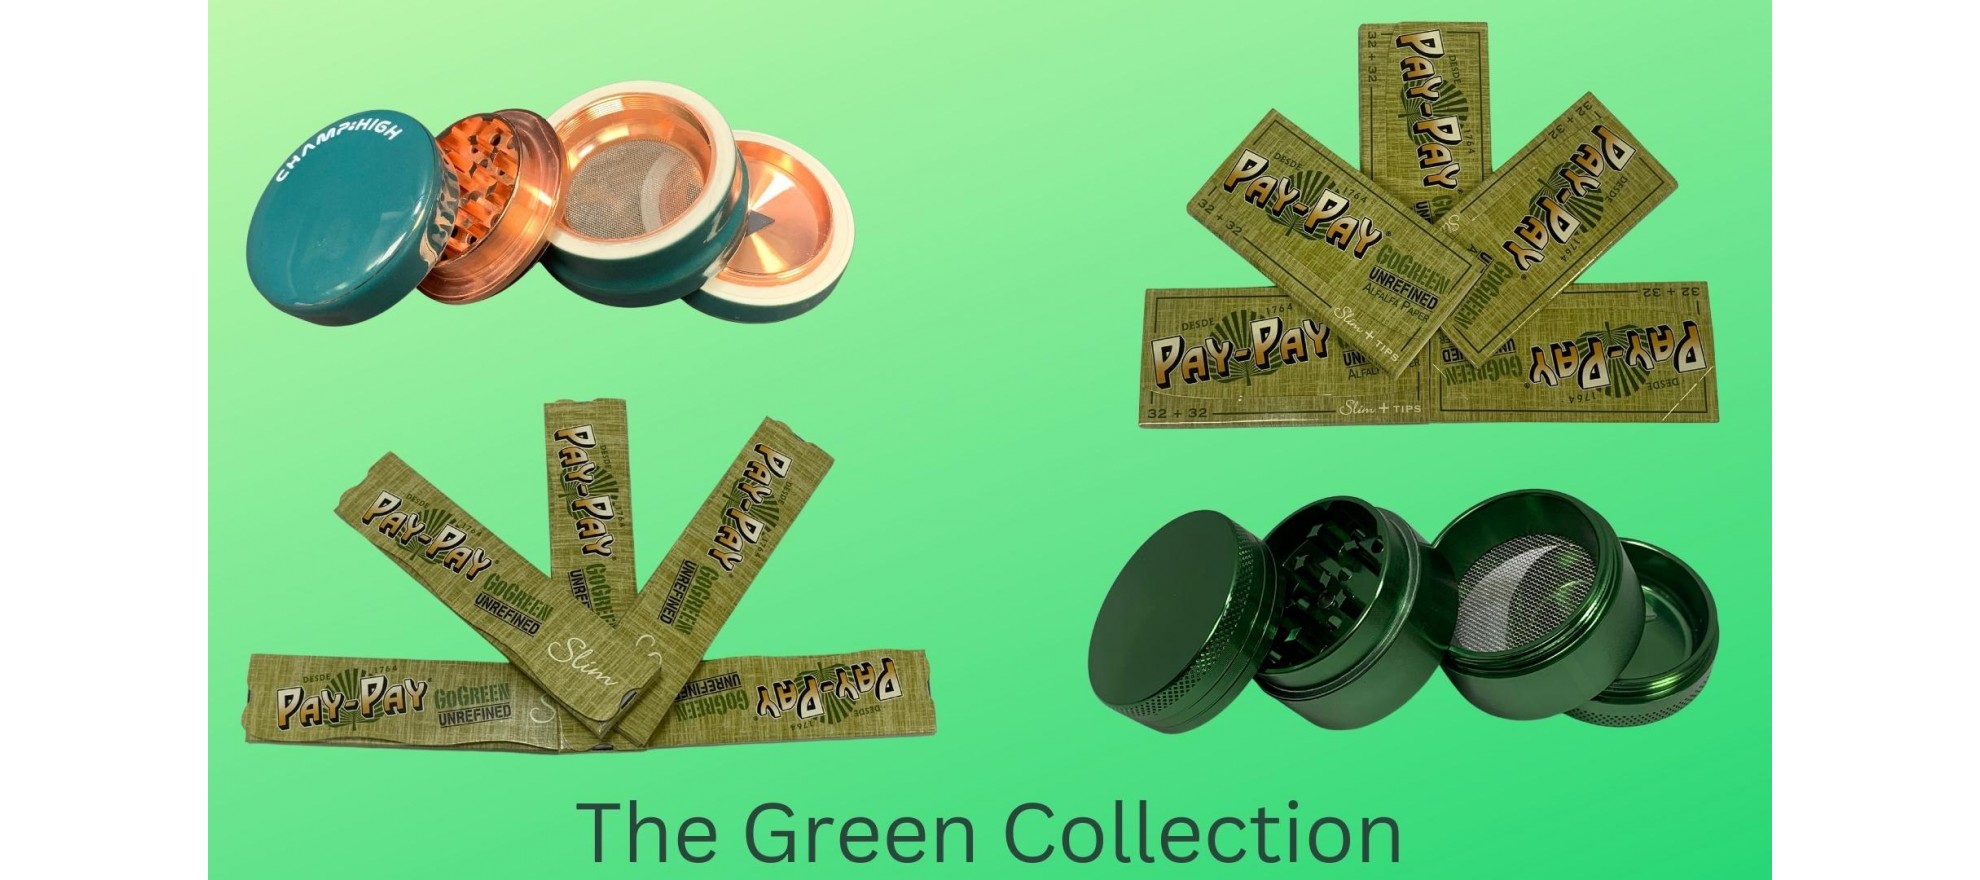 The Green Collection